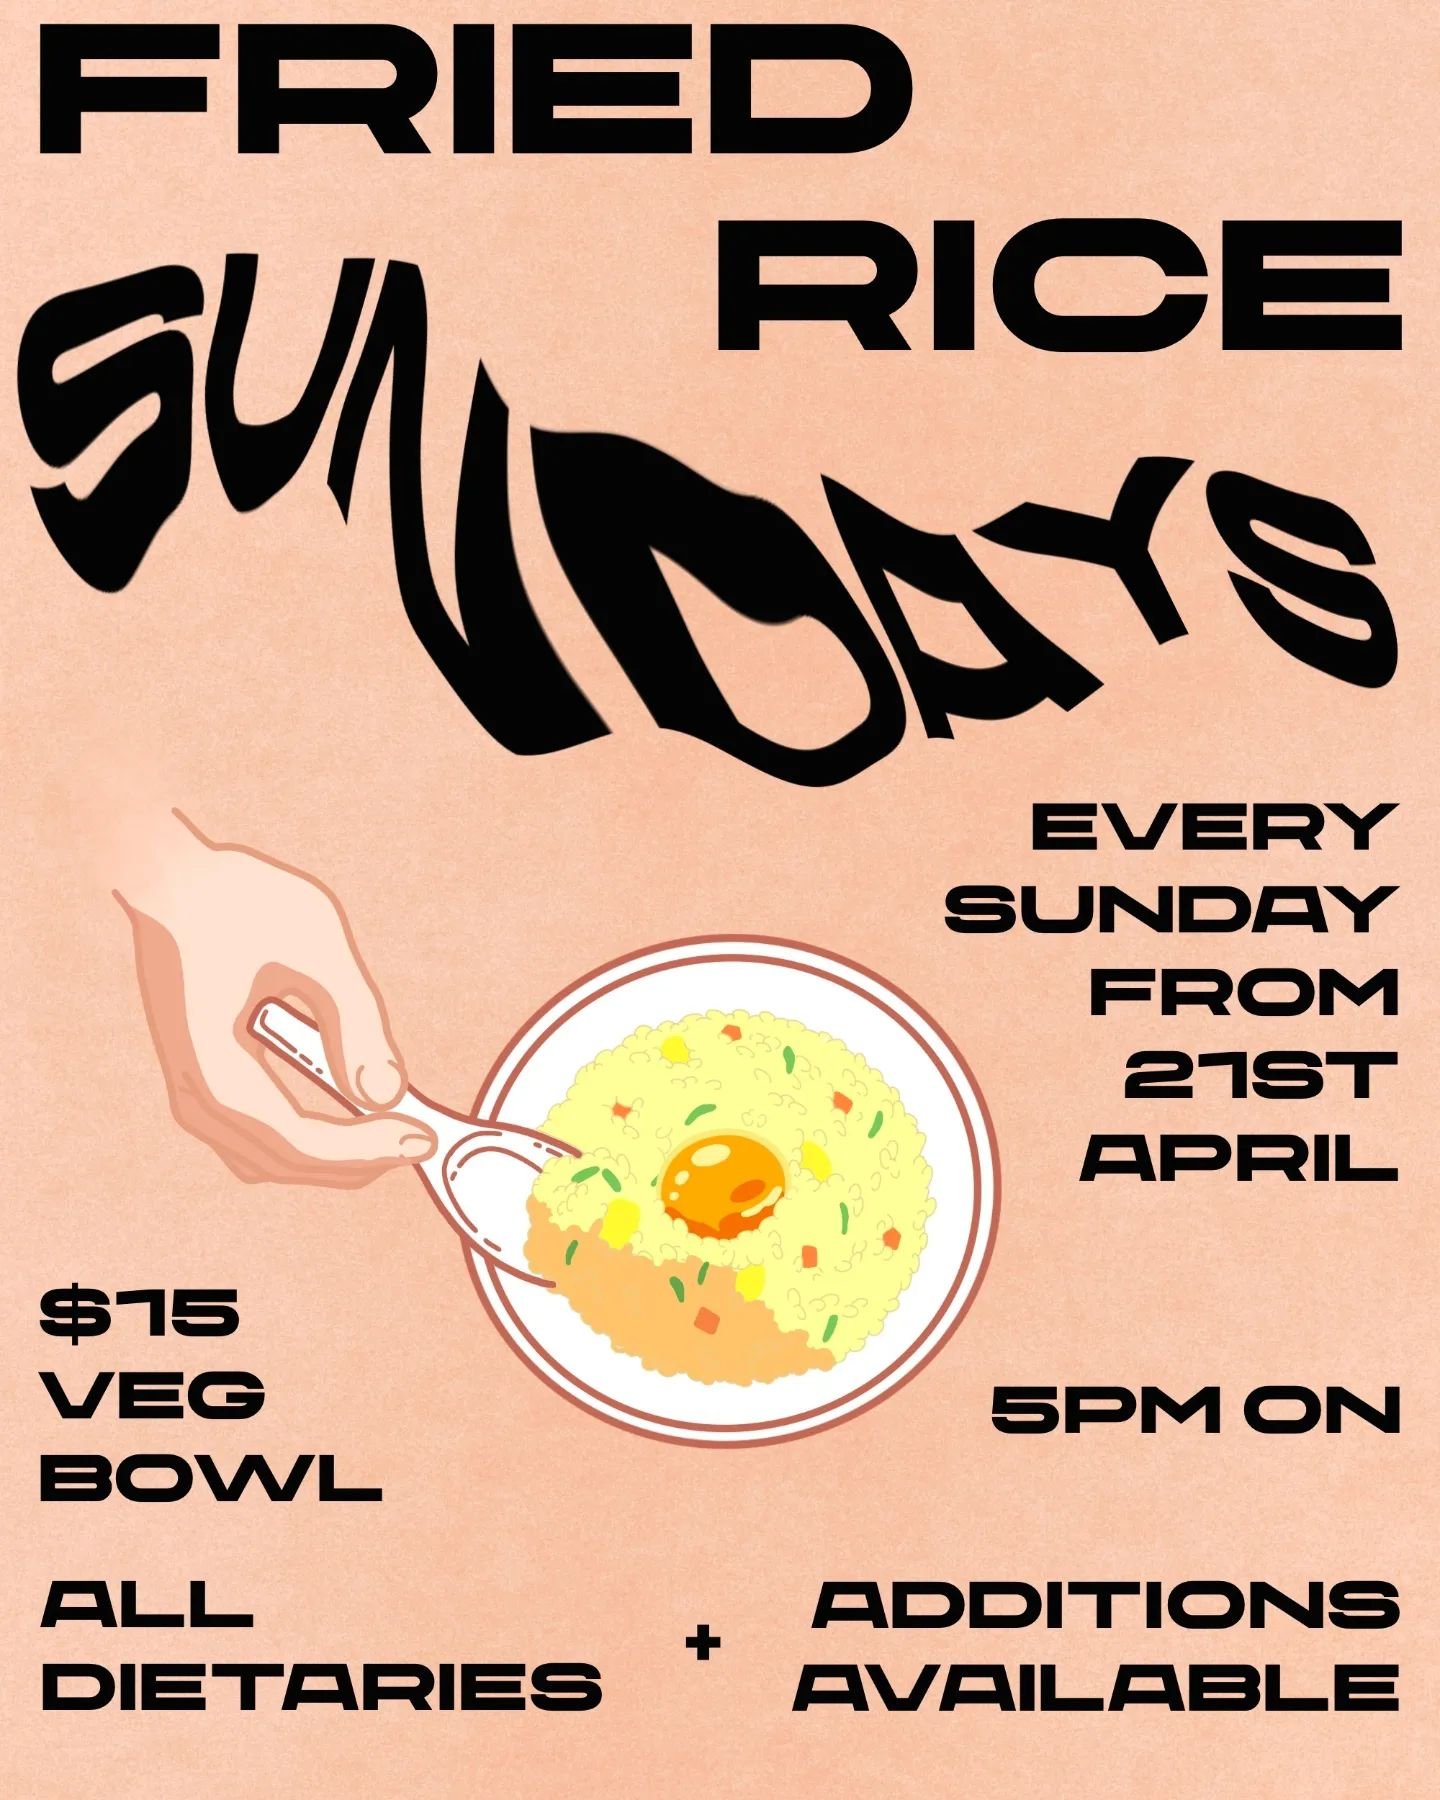 Friends! Big news, starting from April 21st, we're going to be open Sunday nights! 🫨🫨🫨

Instead of our usual menu though, we'll just be serving one dish - Fried Rice! It's getting winter-y, so what better way to ease into the cosy/casual nature th